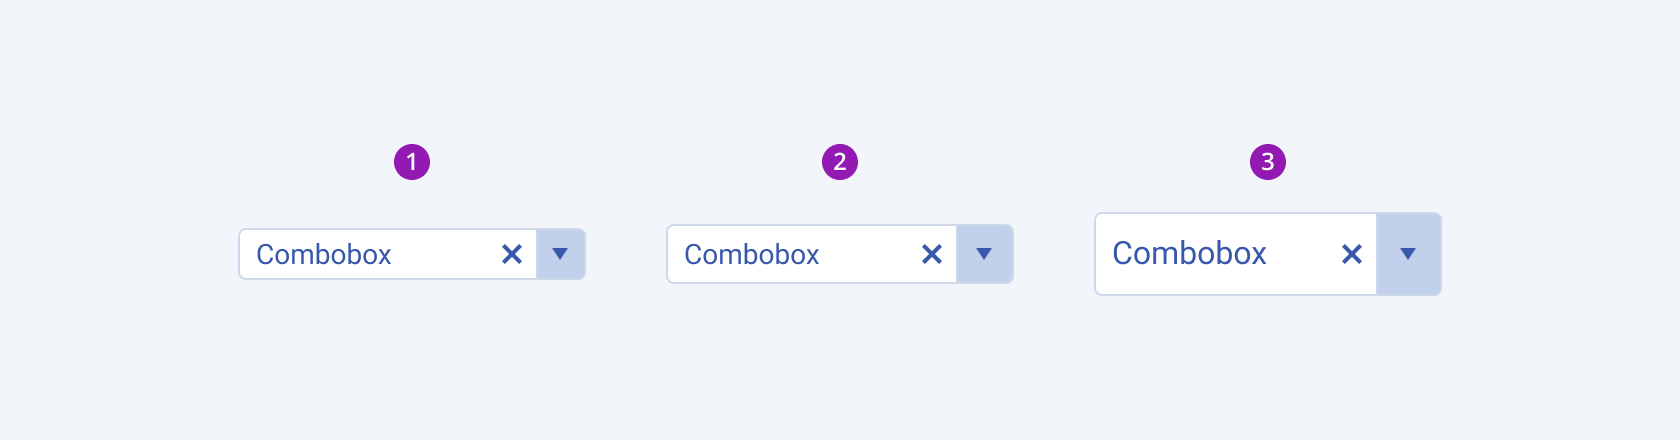 Three Telerik and Kendo UI ComboBox components demonstrating the small, default medium, and large sizes respectively.